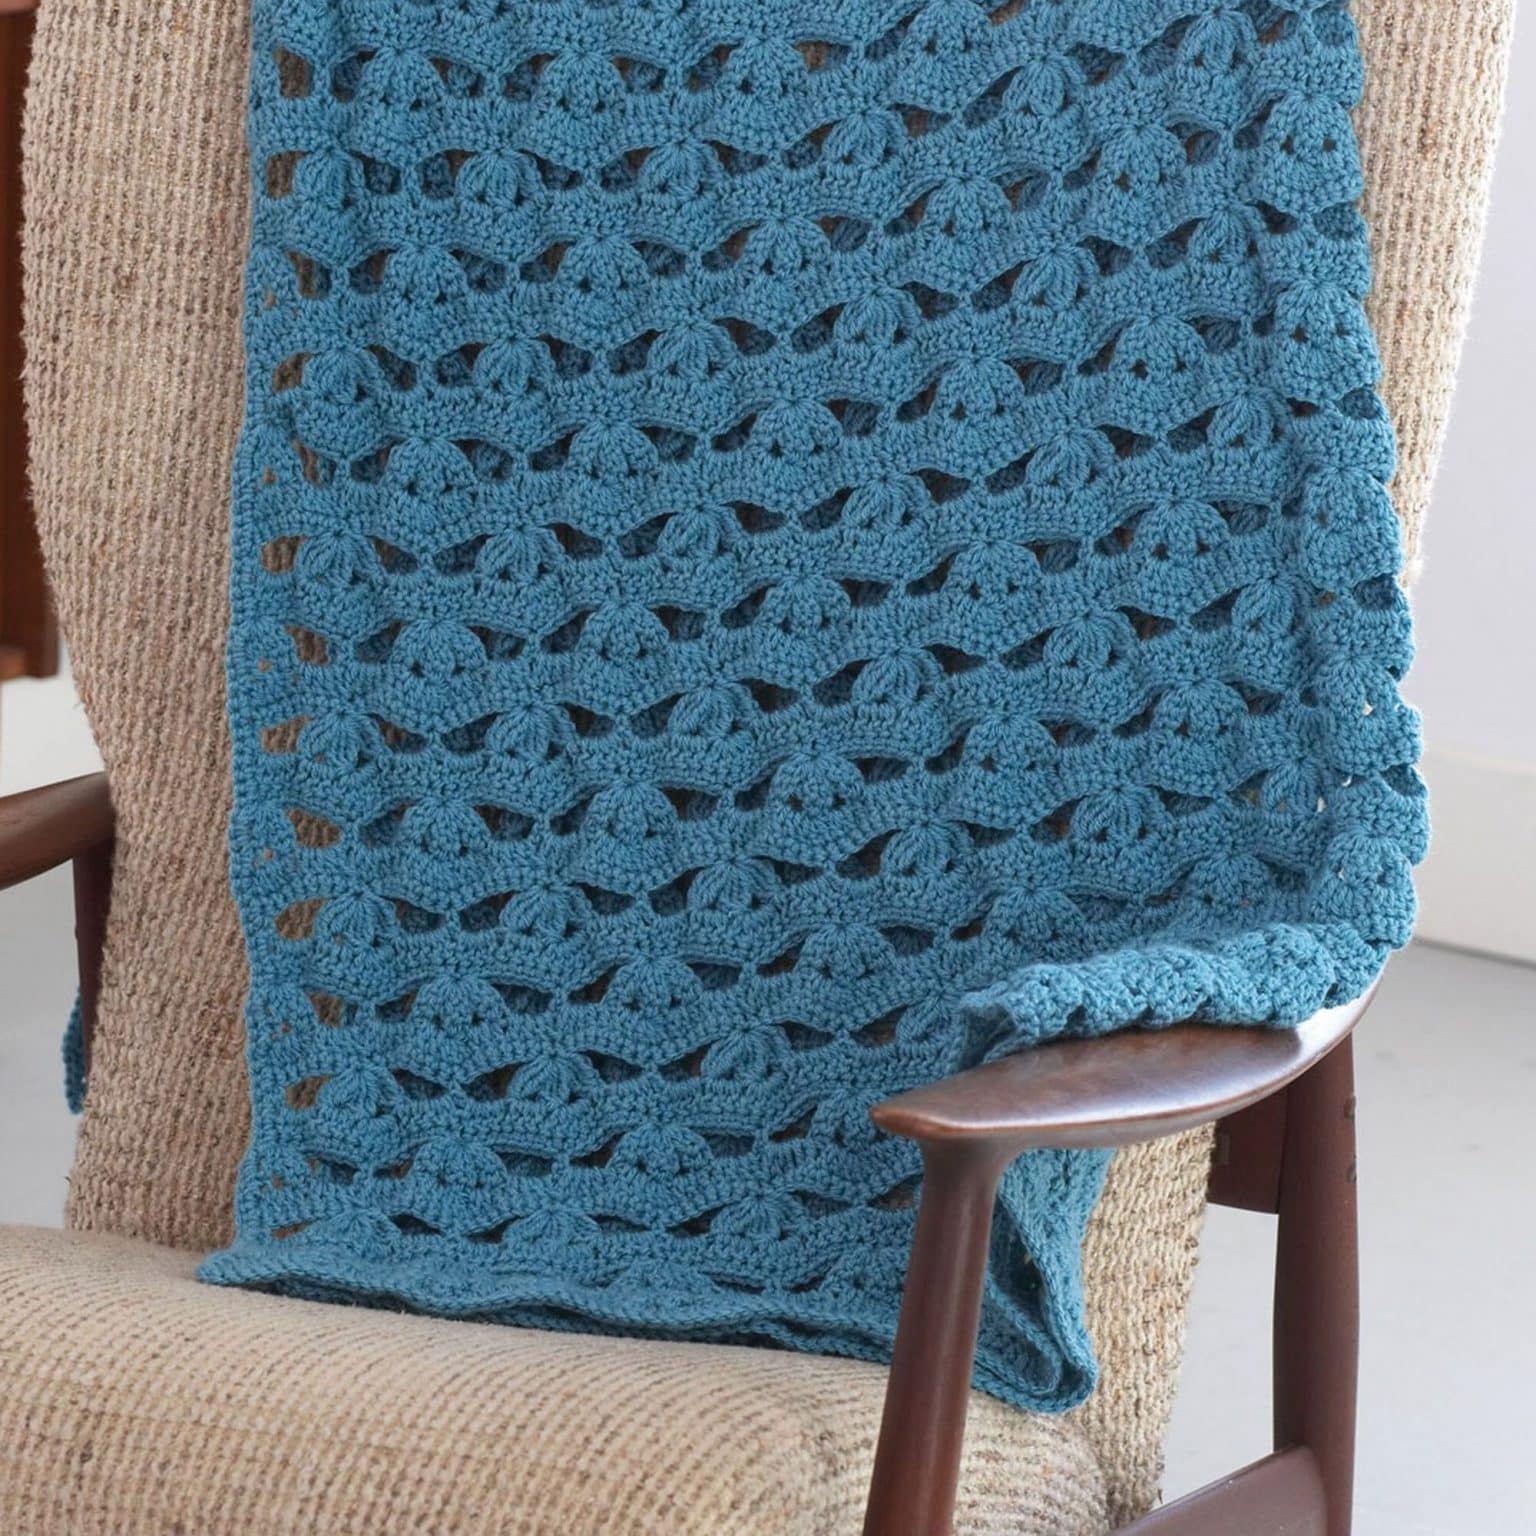 Patons Light And Airy Afghan Free Crochet Pattern | Lyns Crafts